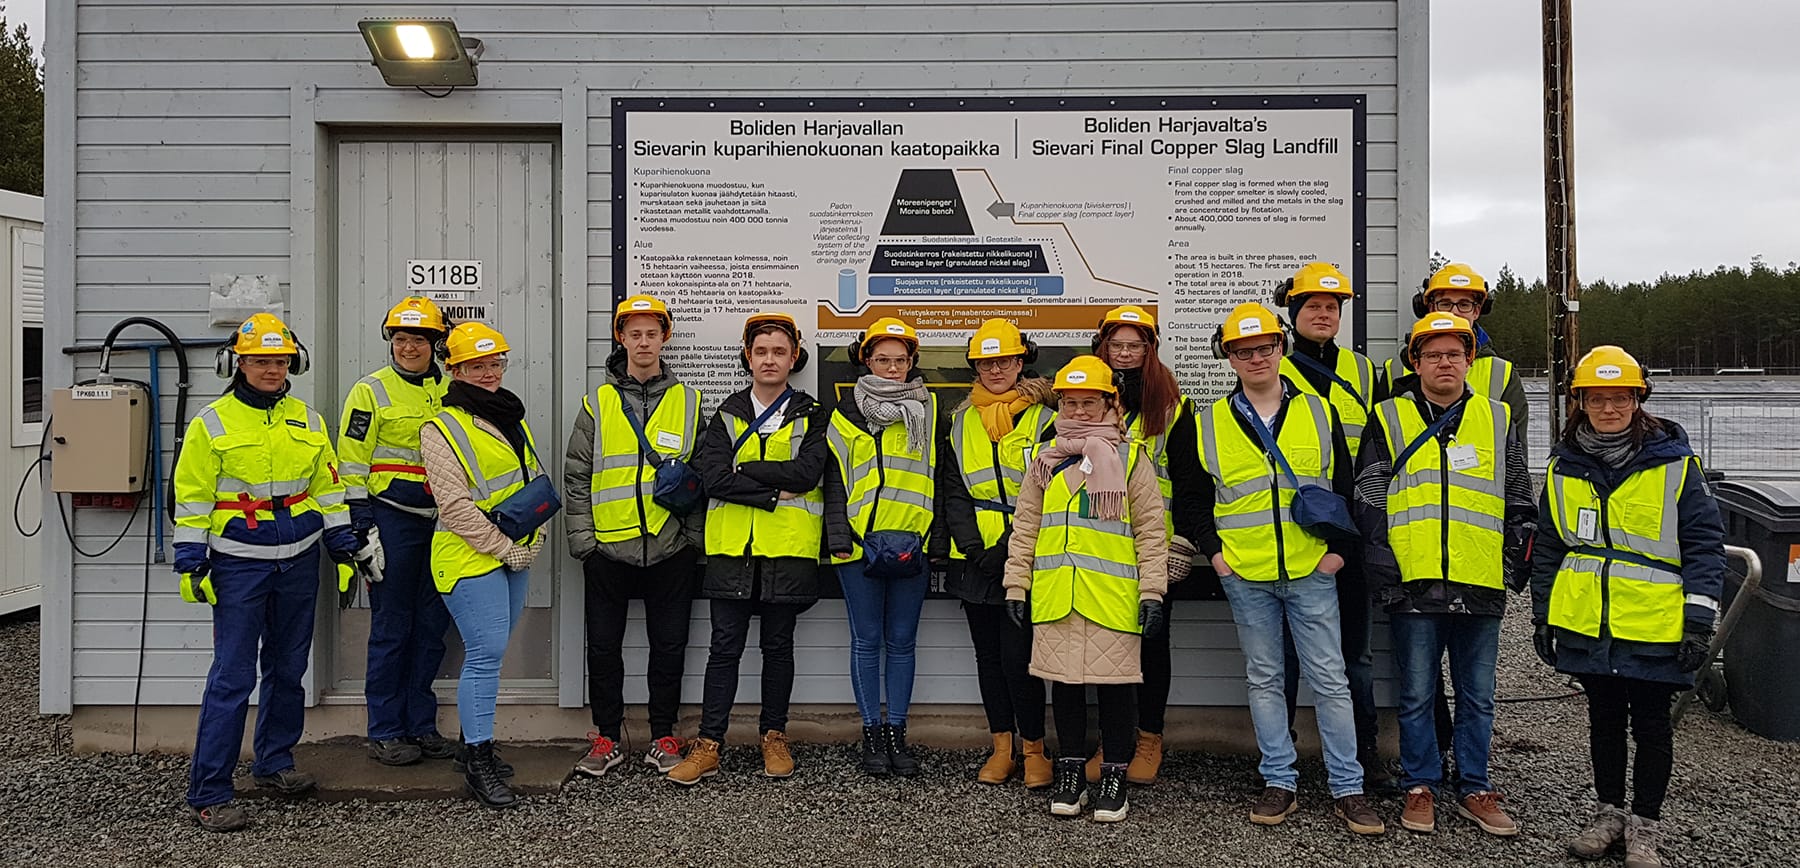 Student group wearing safety workwear and standing at copper slag landfill.